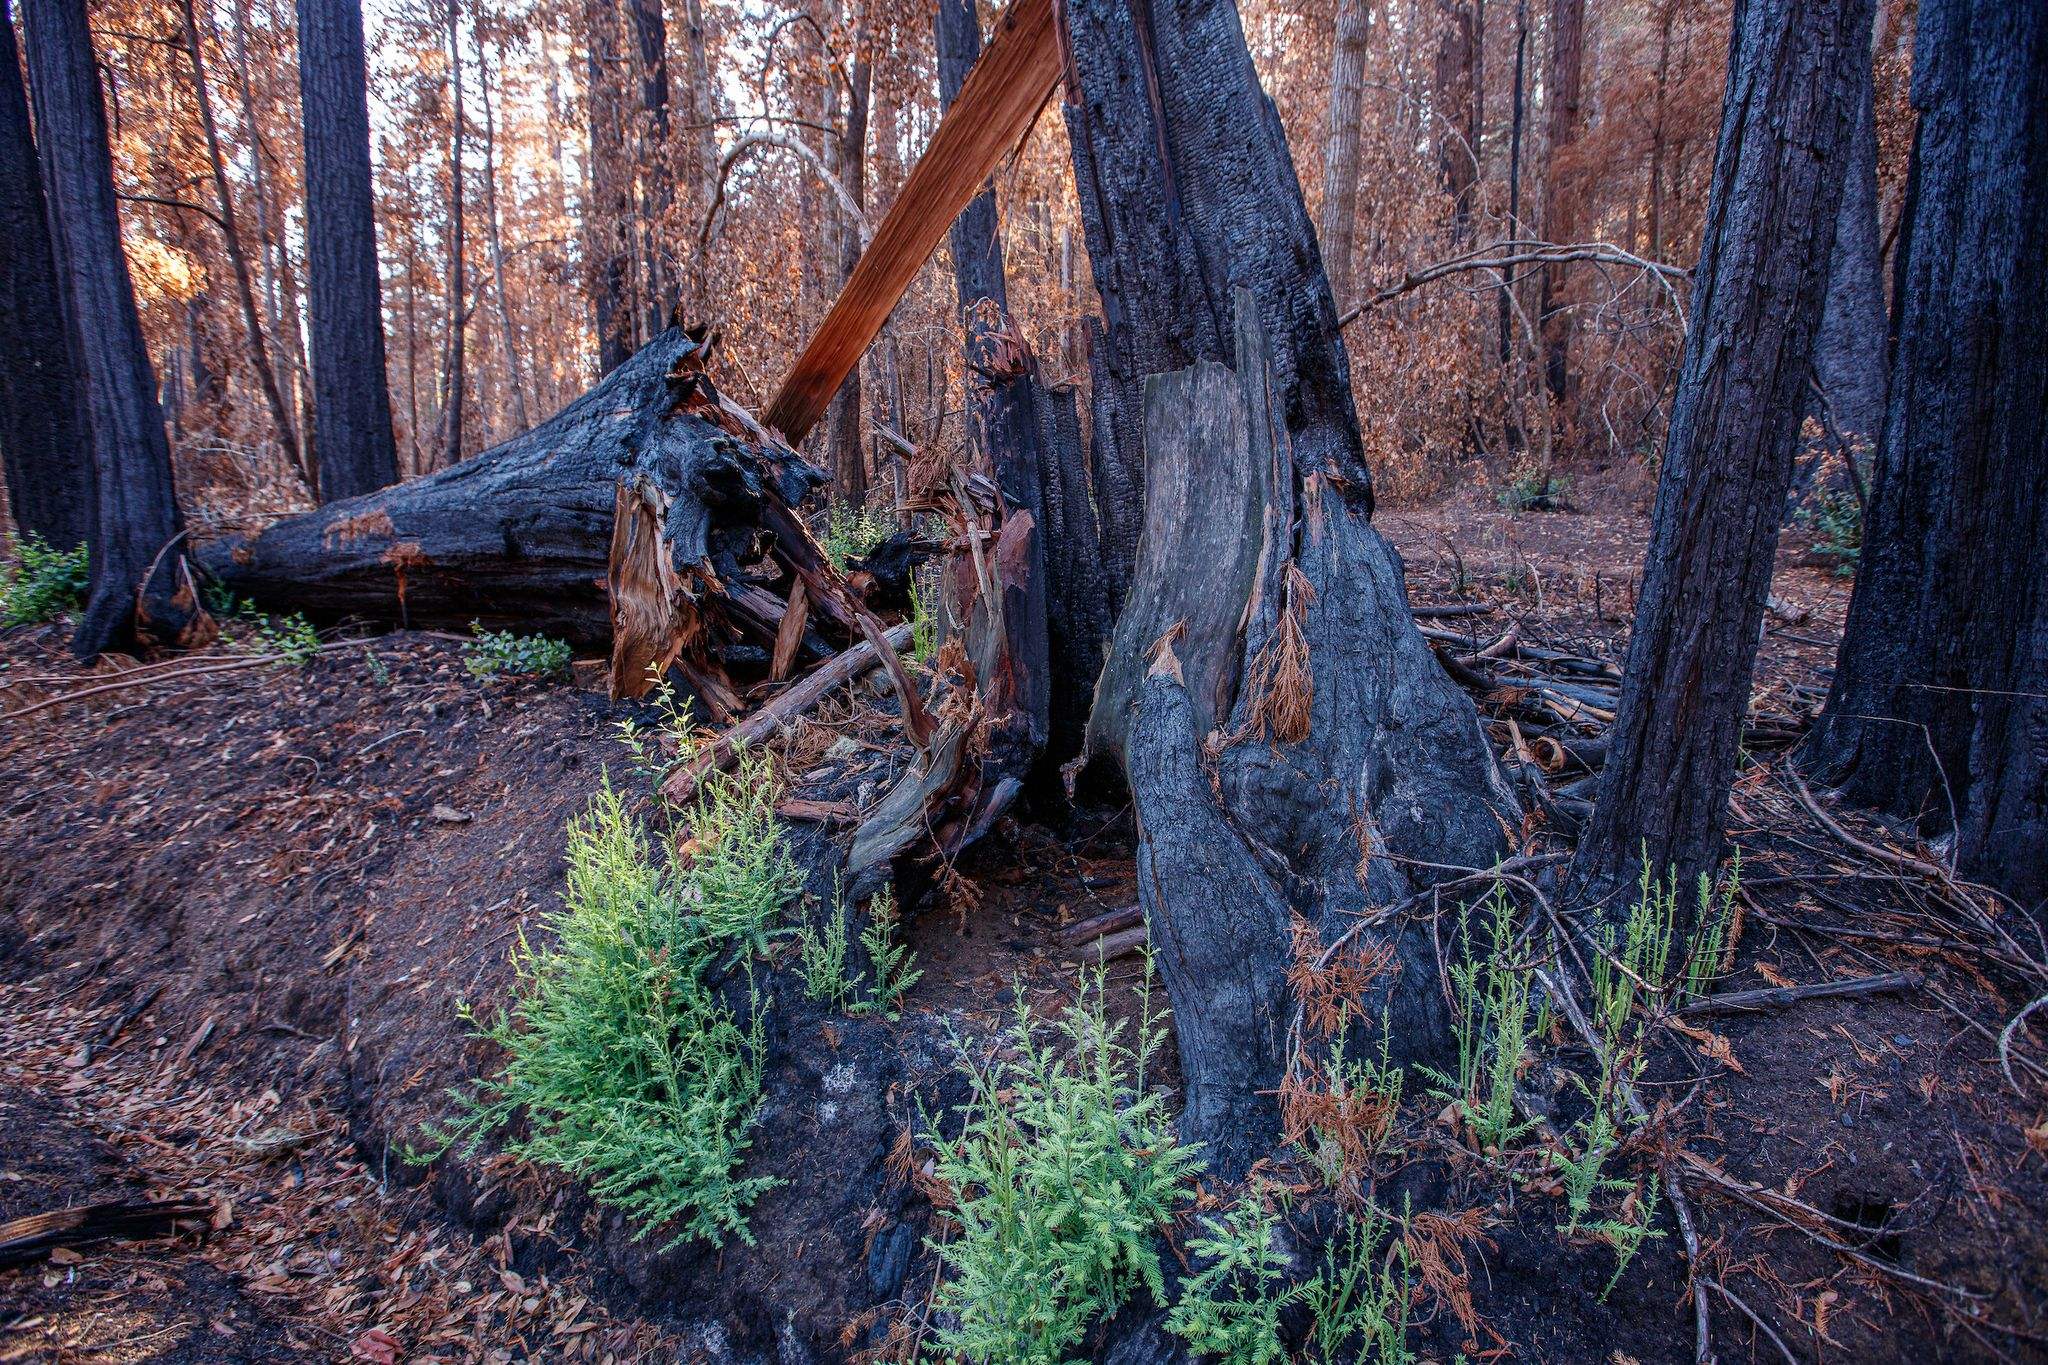 New trees grow from the burned out trunk of a redwood on the forest floor